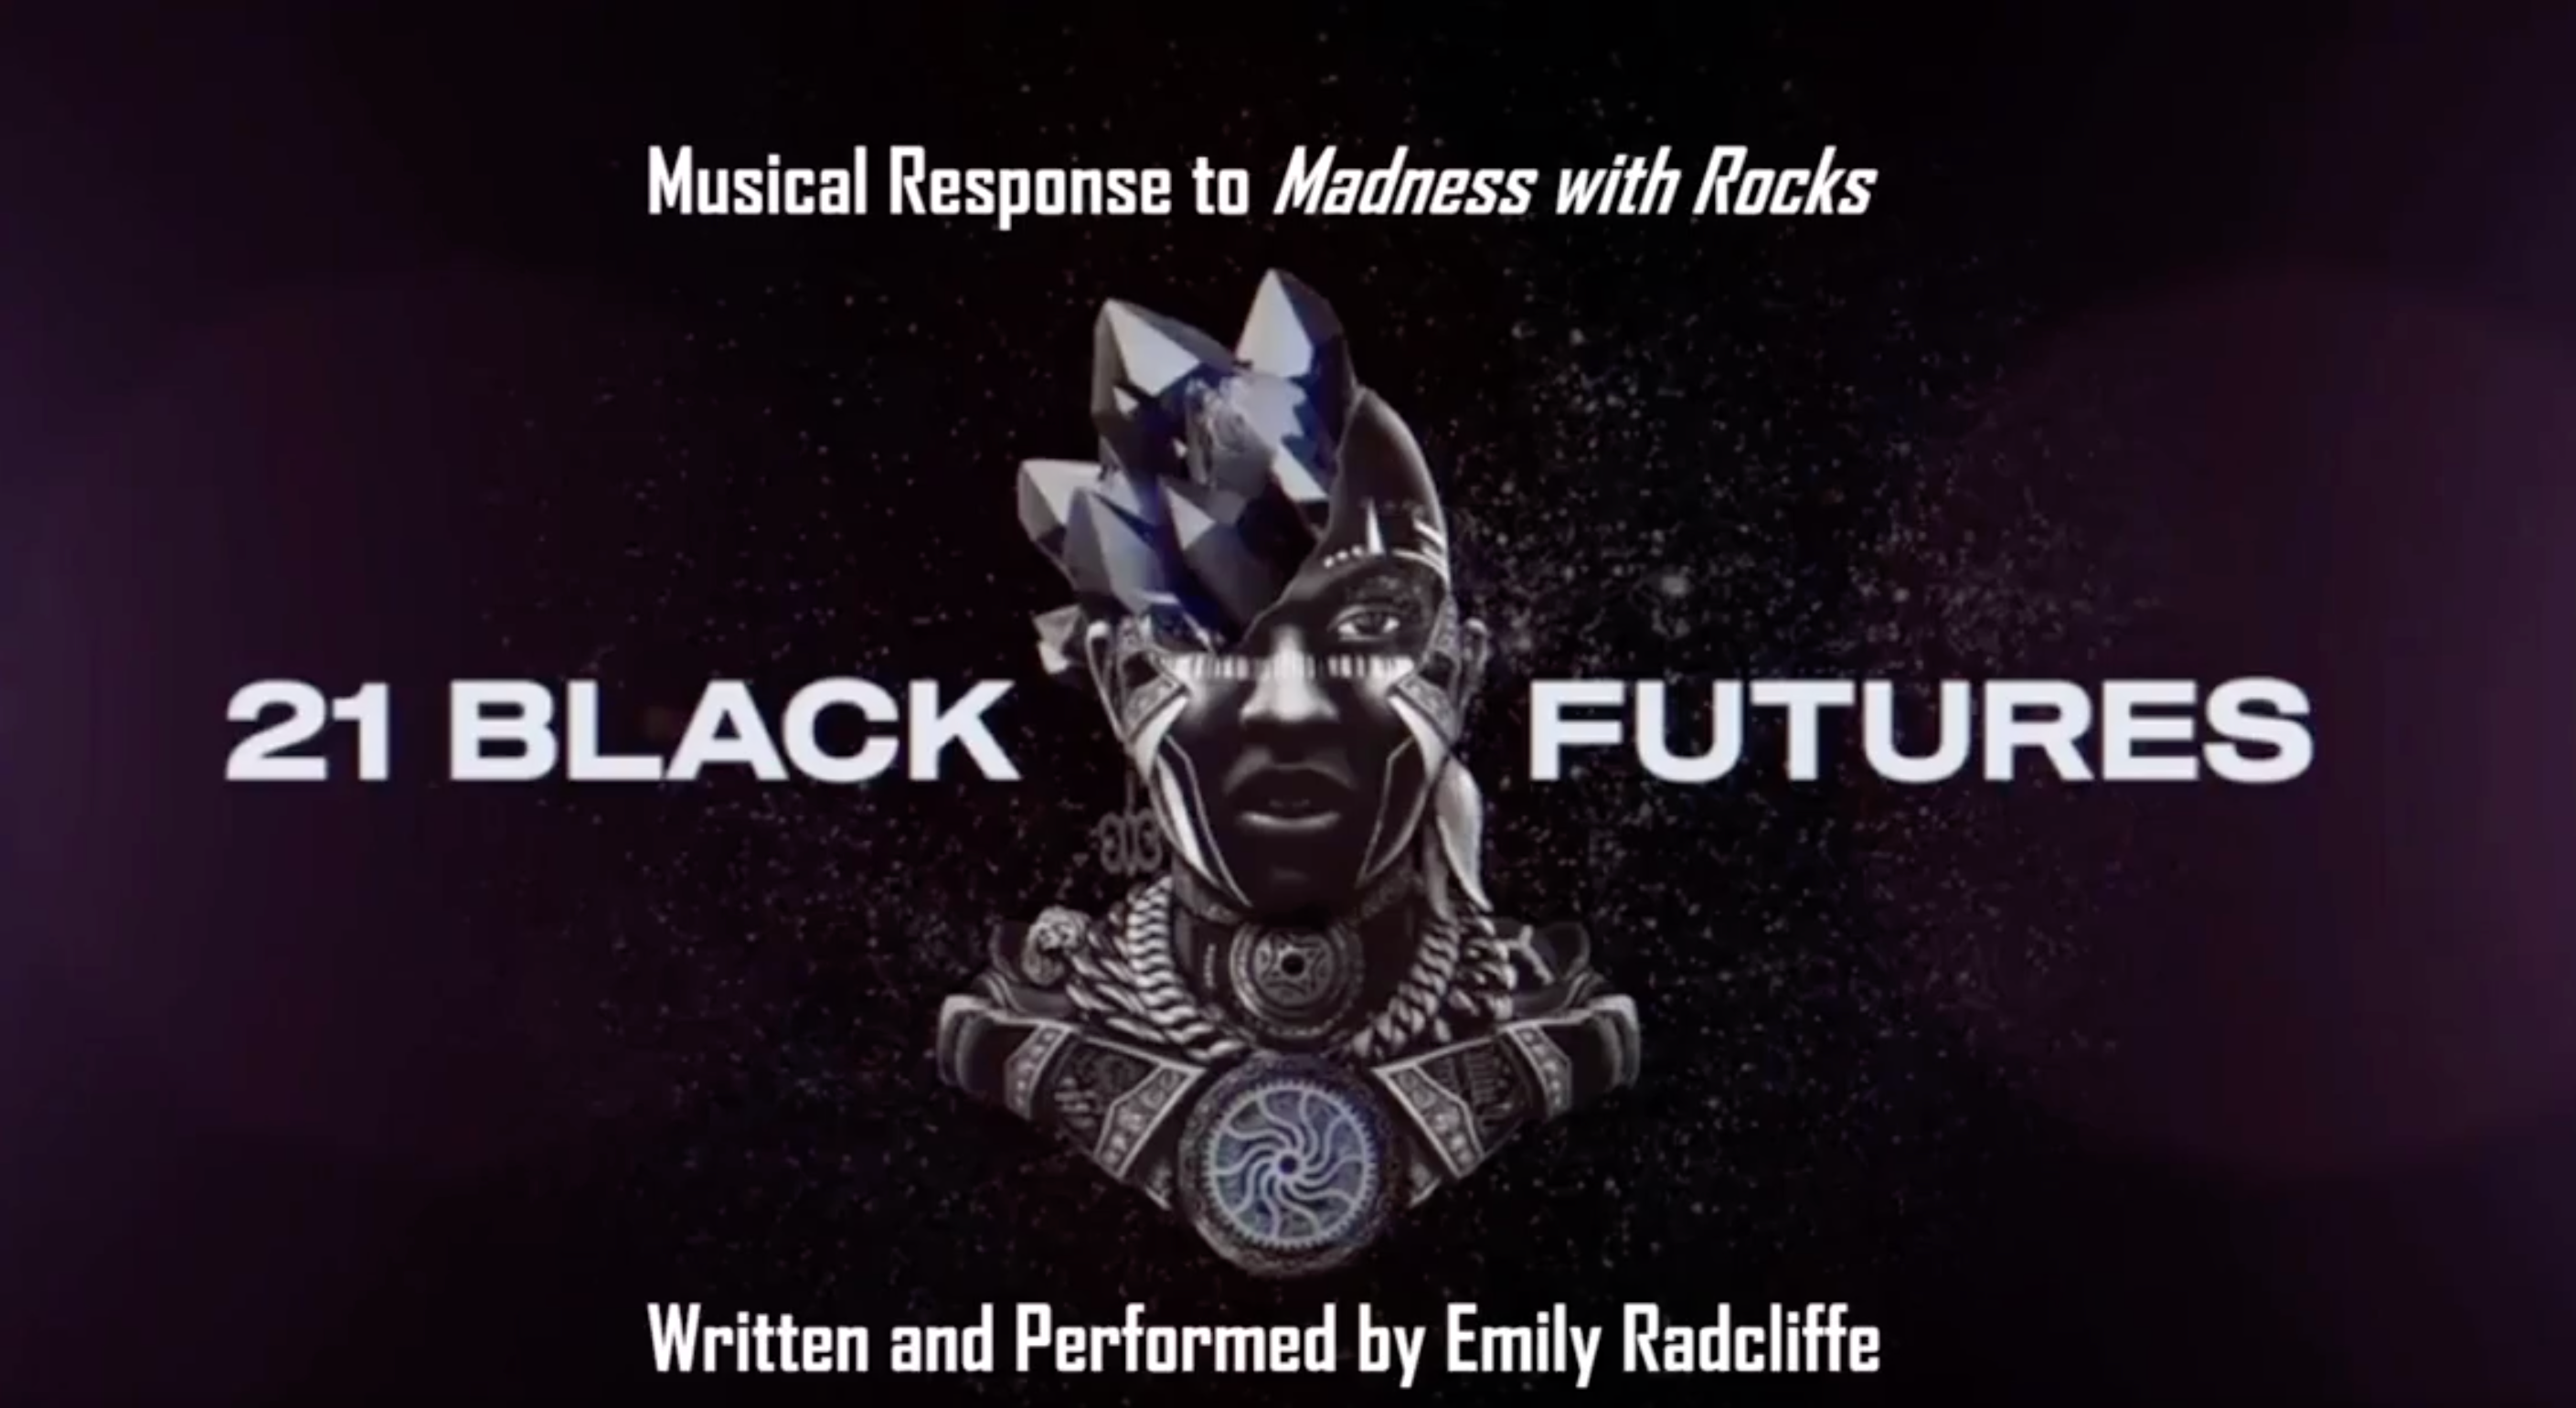 Emily Radcliffe's song response to 'Madness With Rocks'